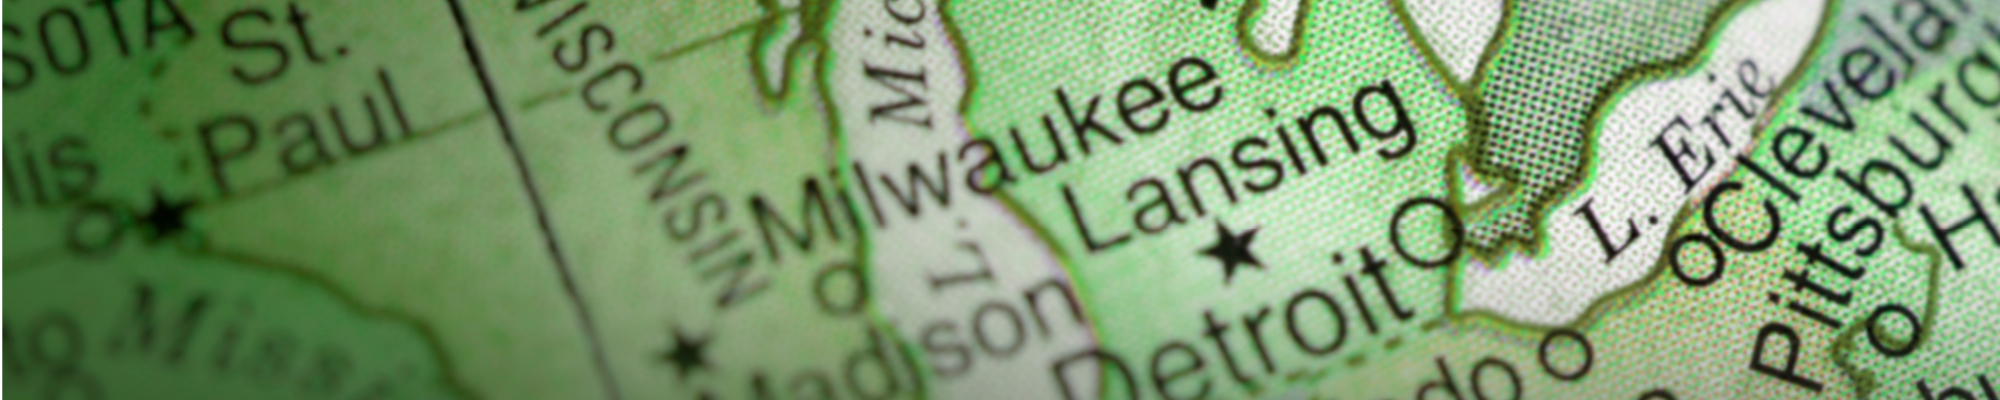 Close up of a map focusing on Michigan and Wisconsin